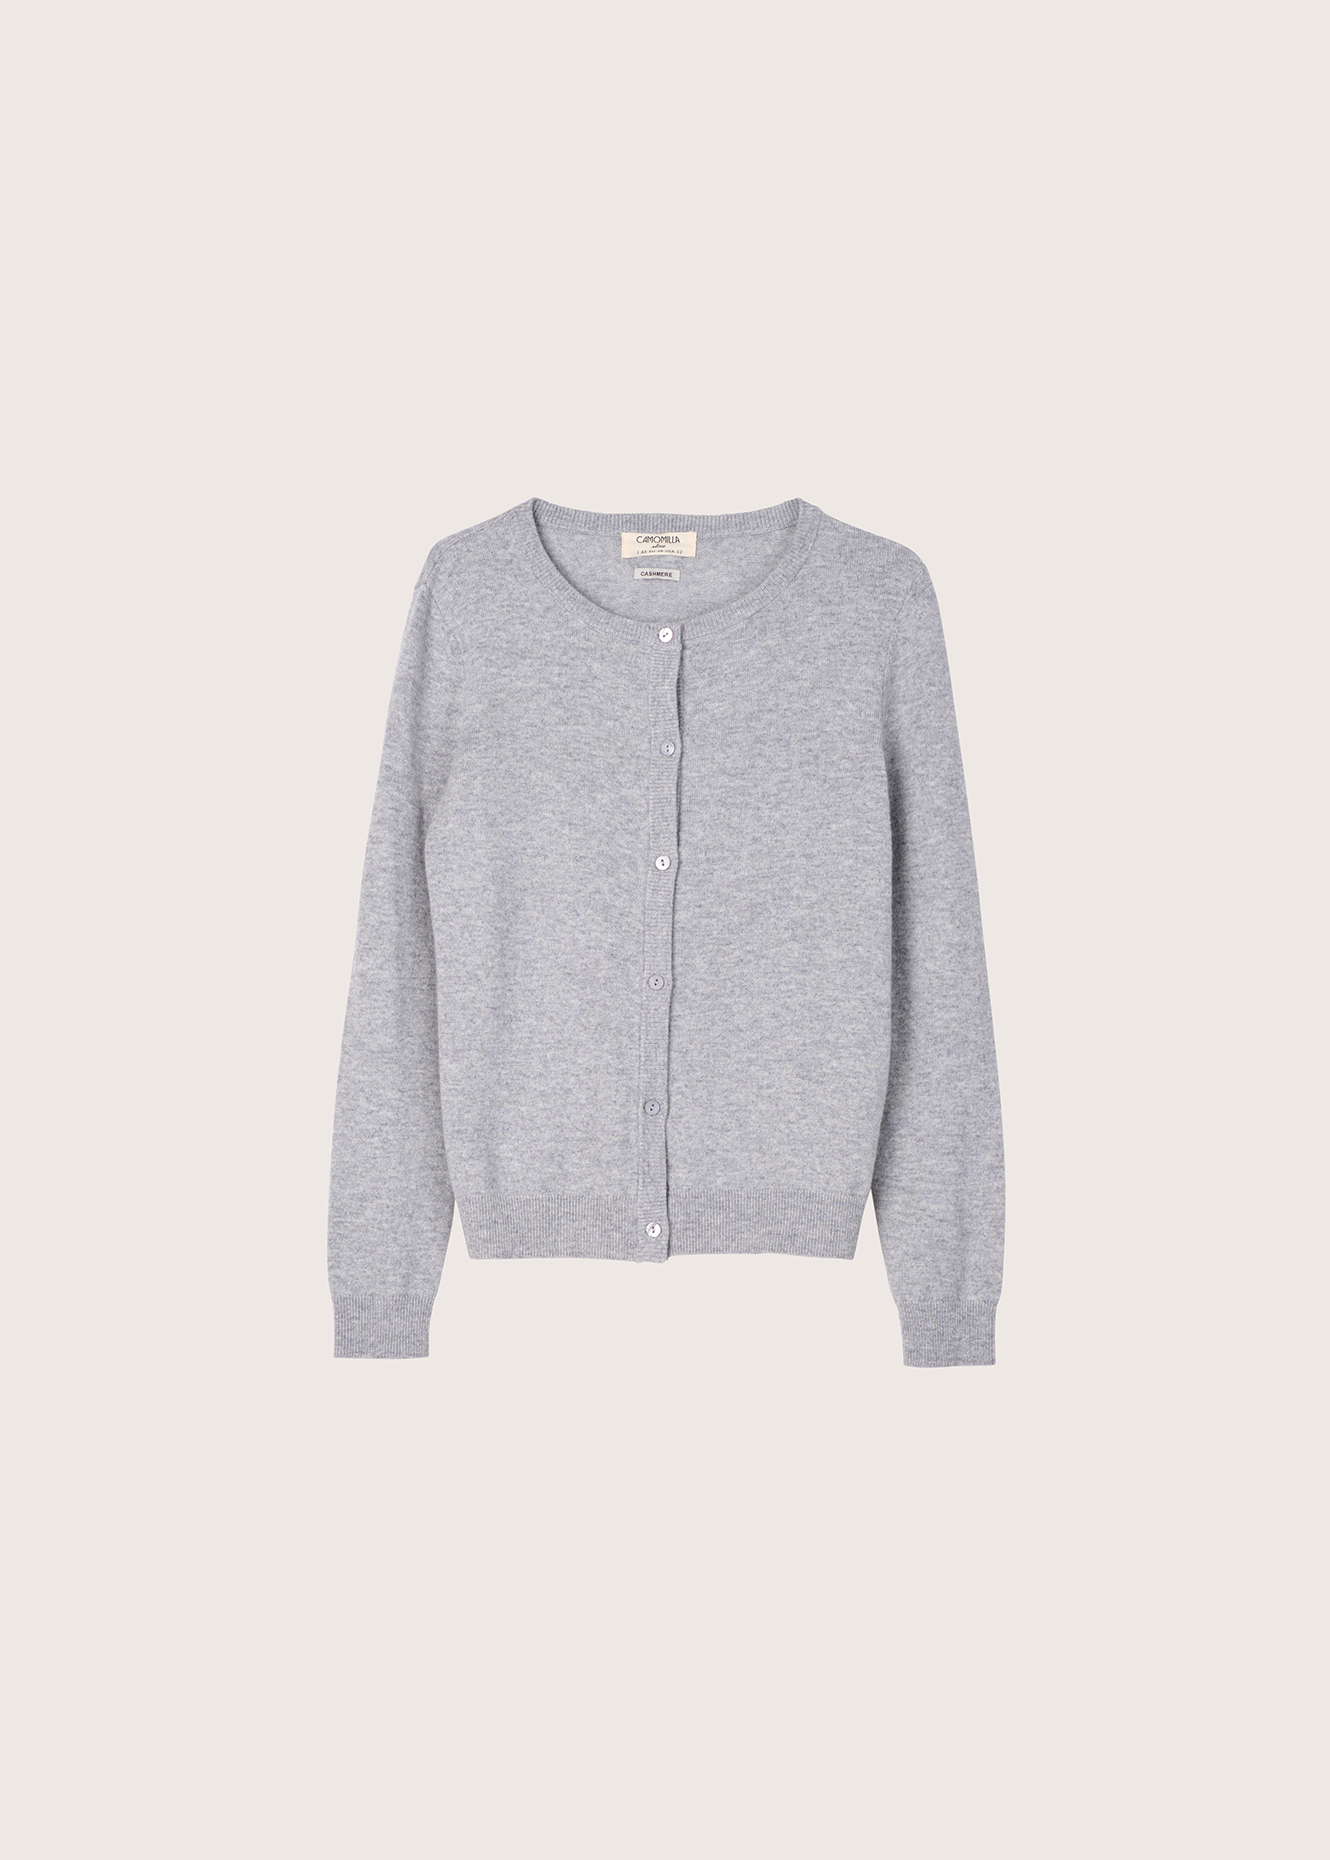 Clear 100% wool and cashmere cardigan